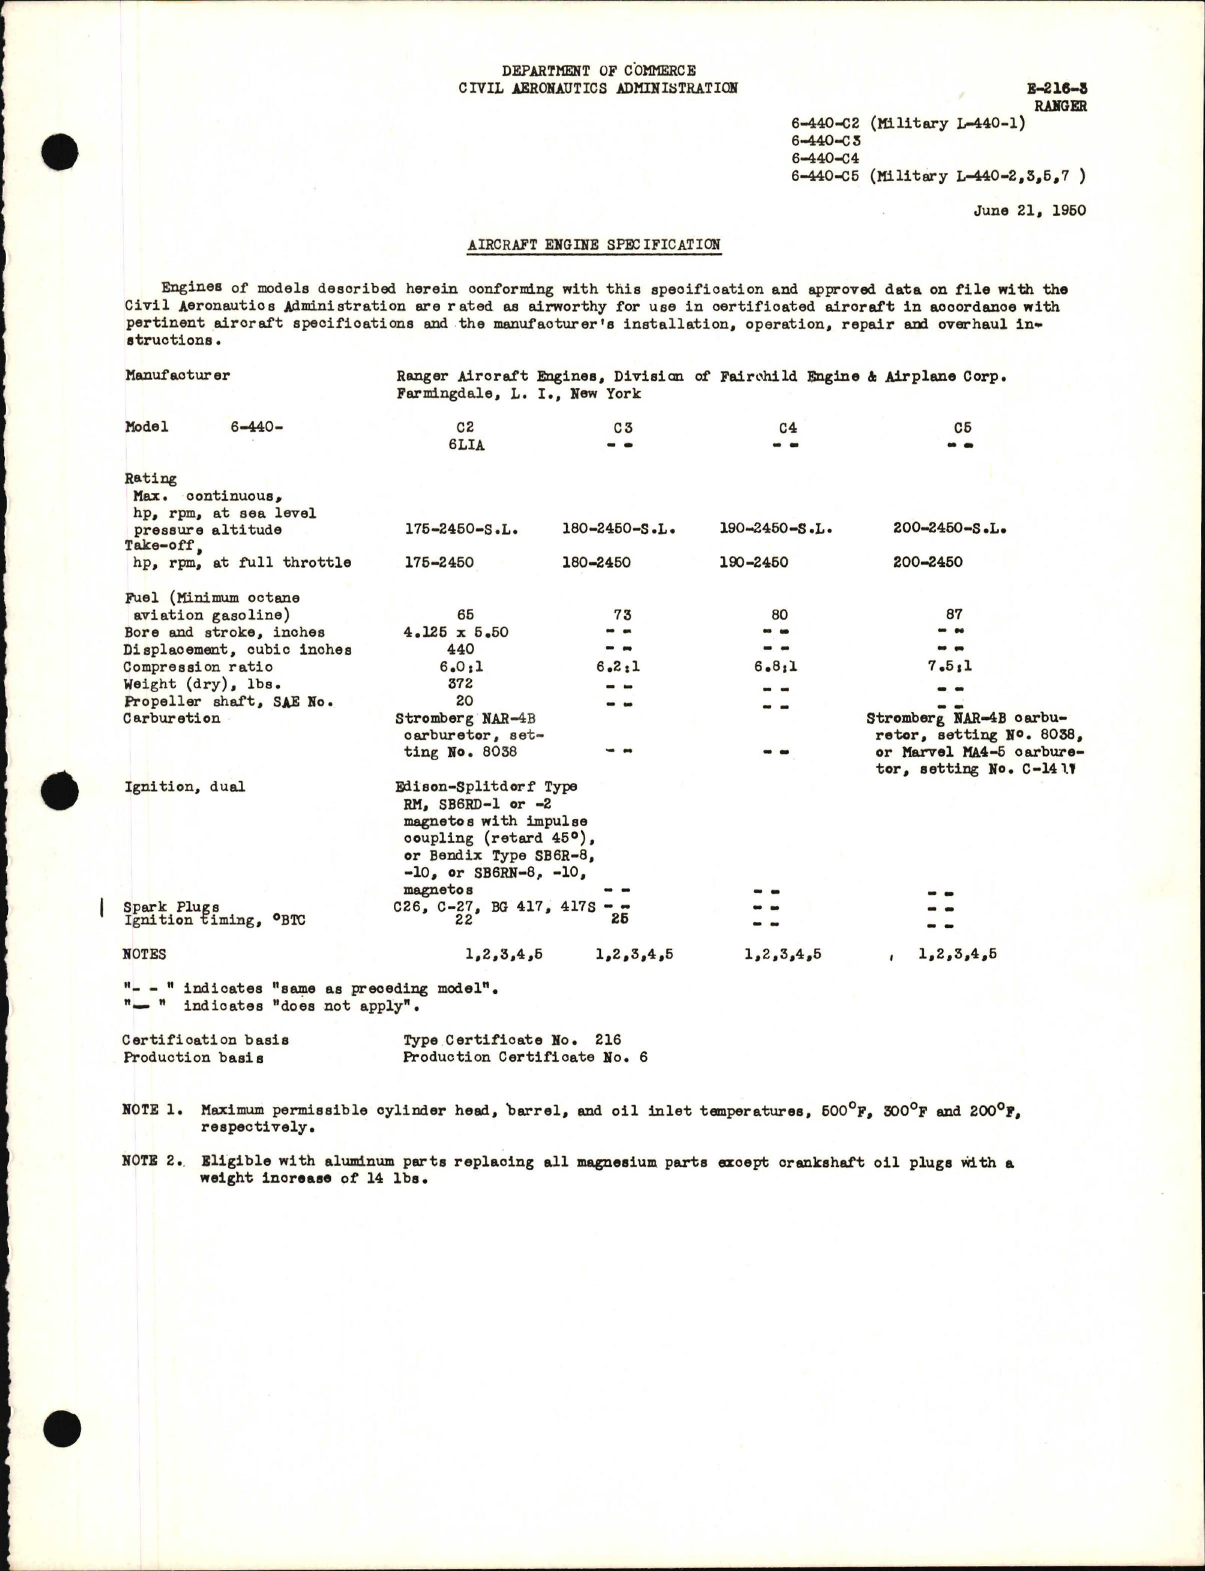 Sample page 1 from AirCorps Library document: 6-440-C2 and L-440-1